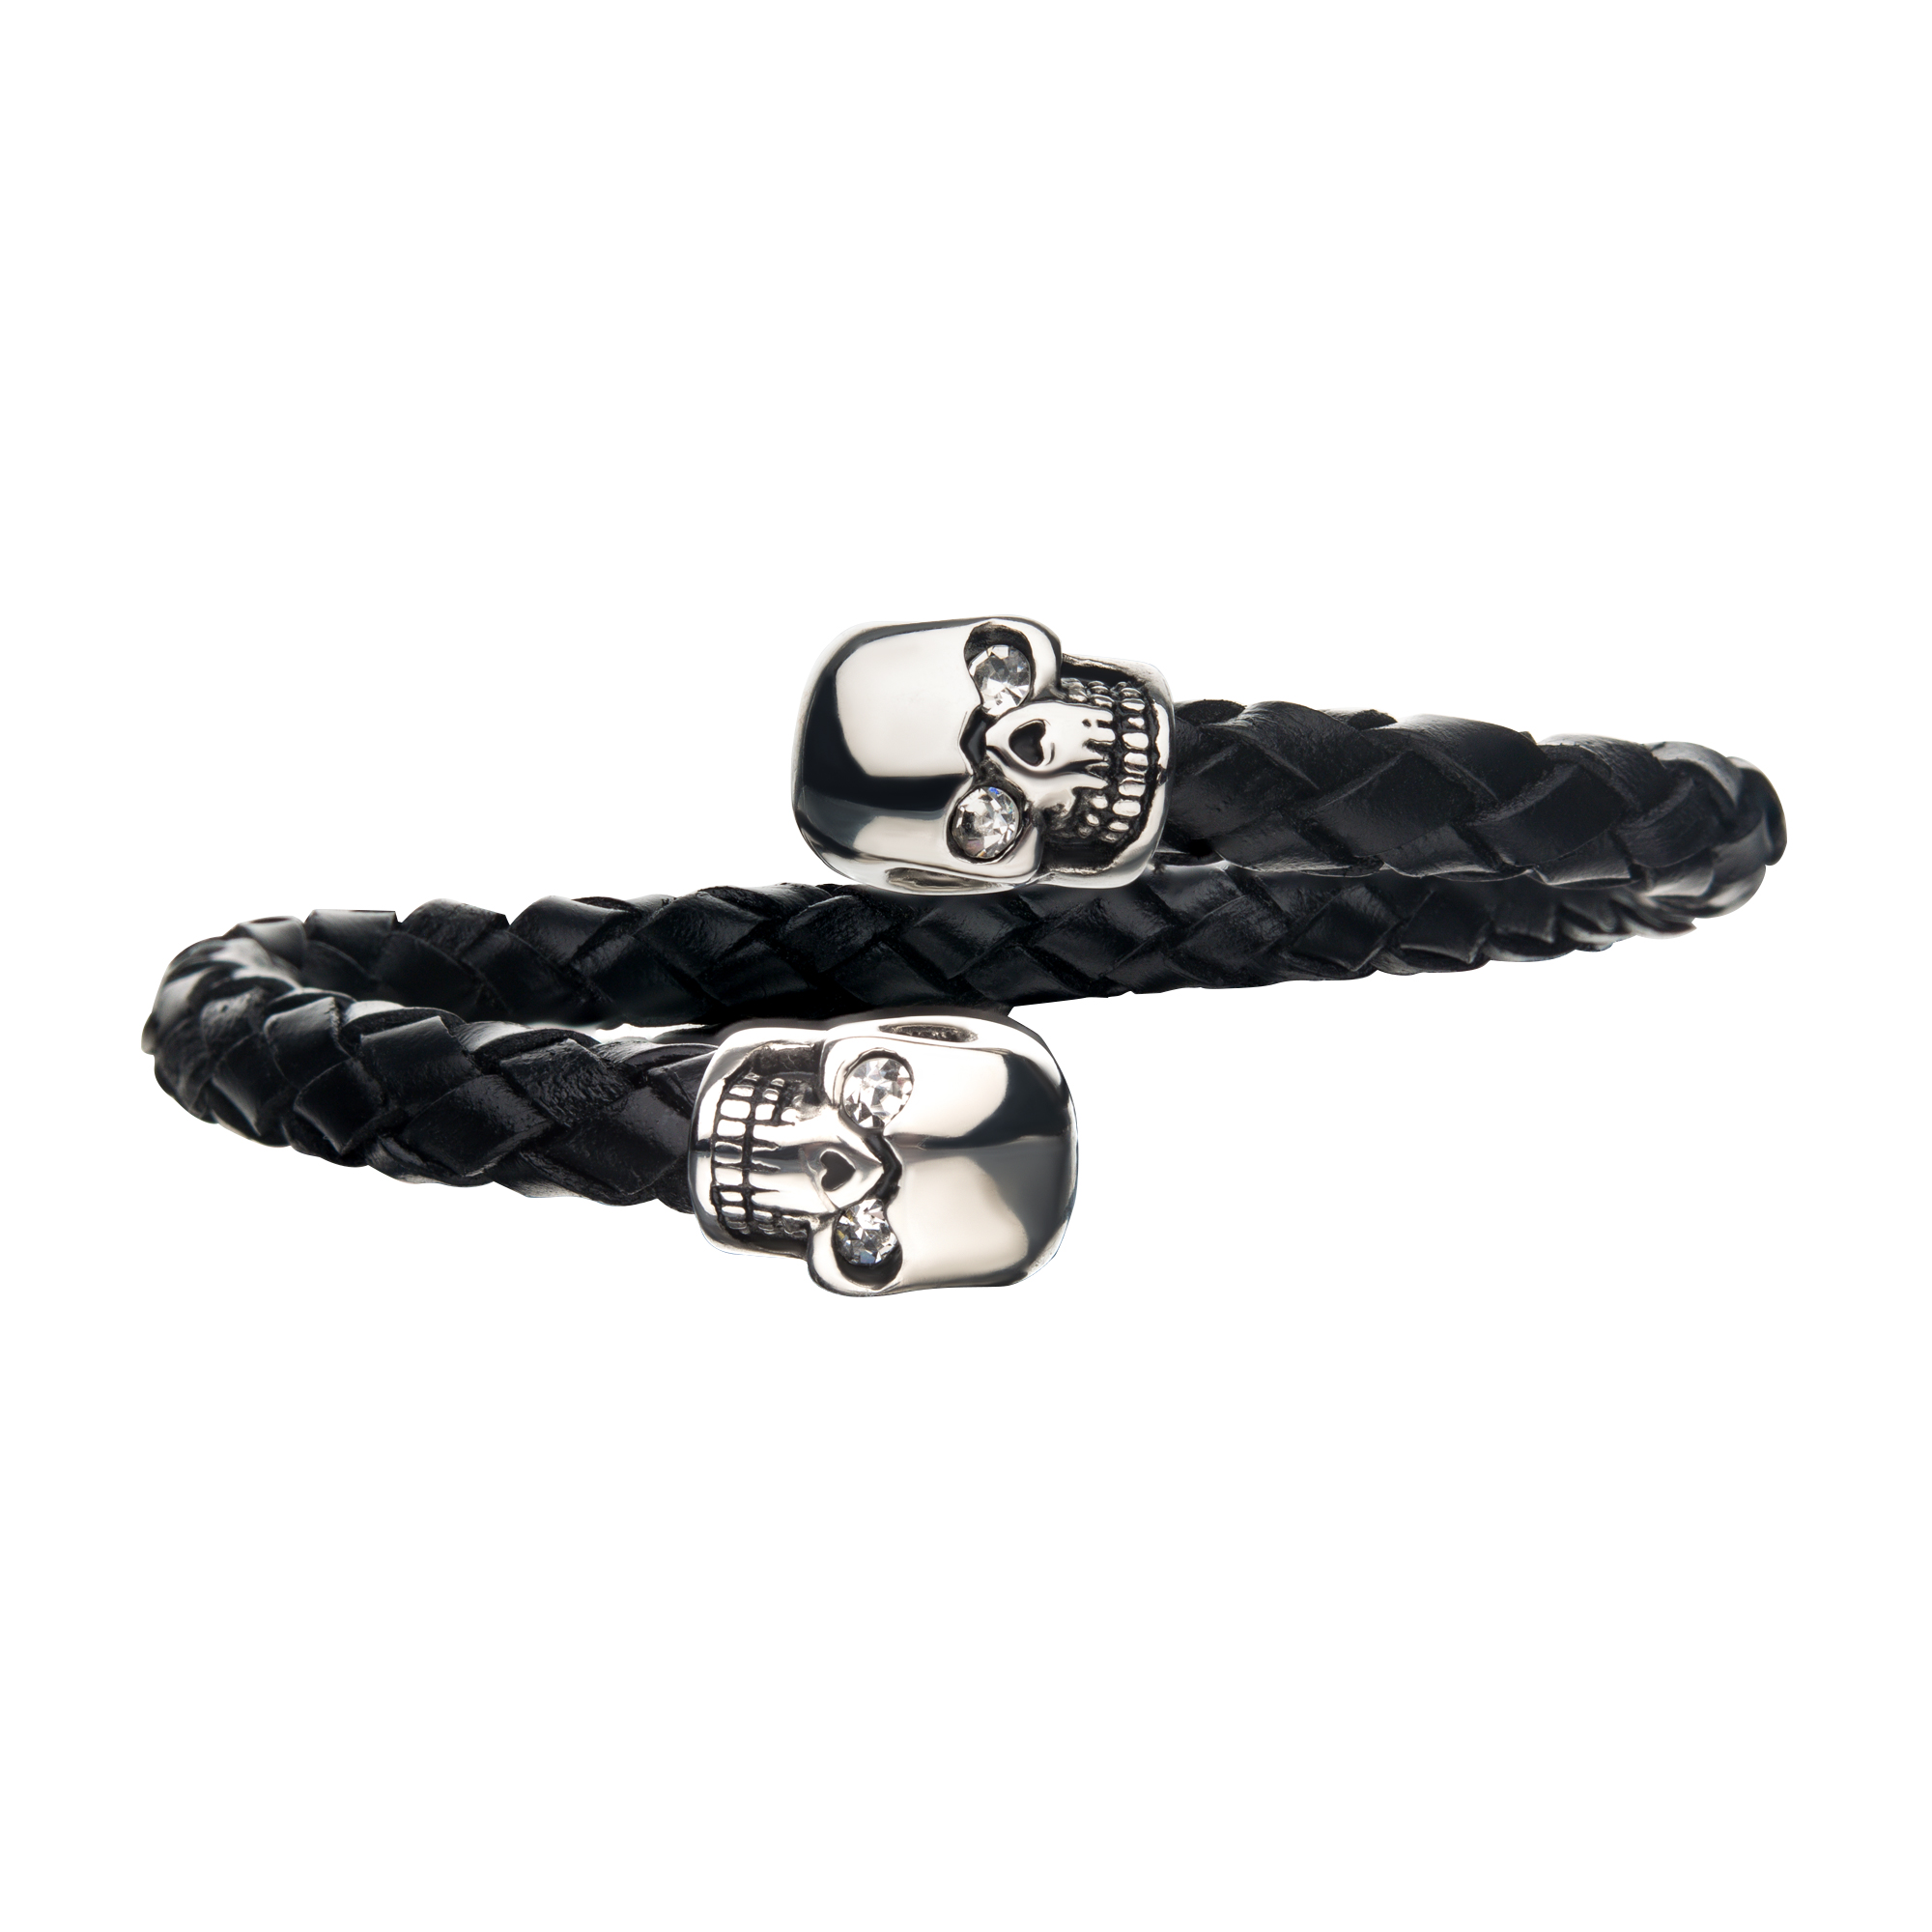 Skull Ends Cuff Leather Bracelet Lewis Jewelers, Inc. Ansonia, CT